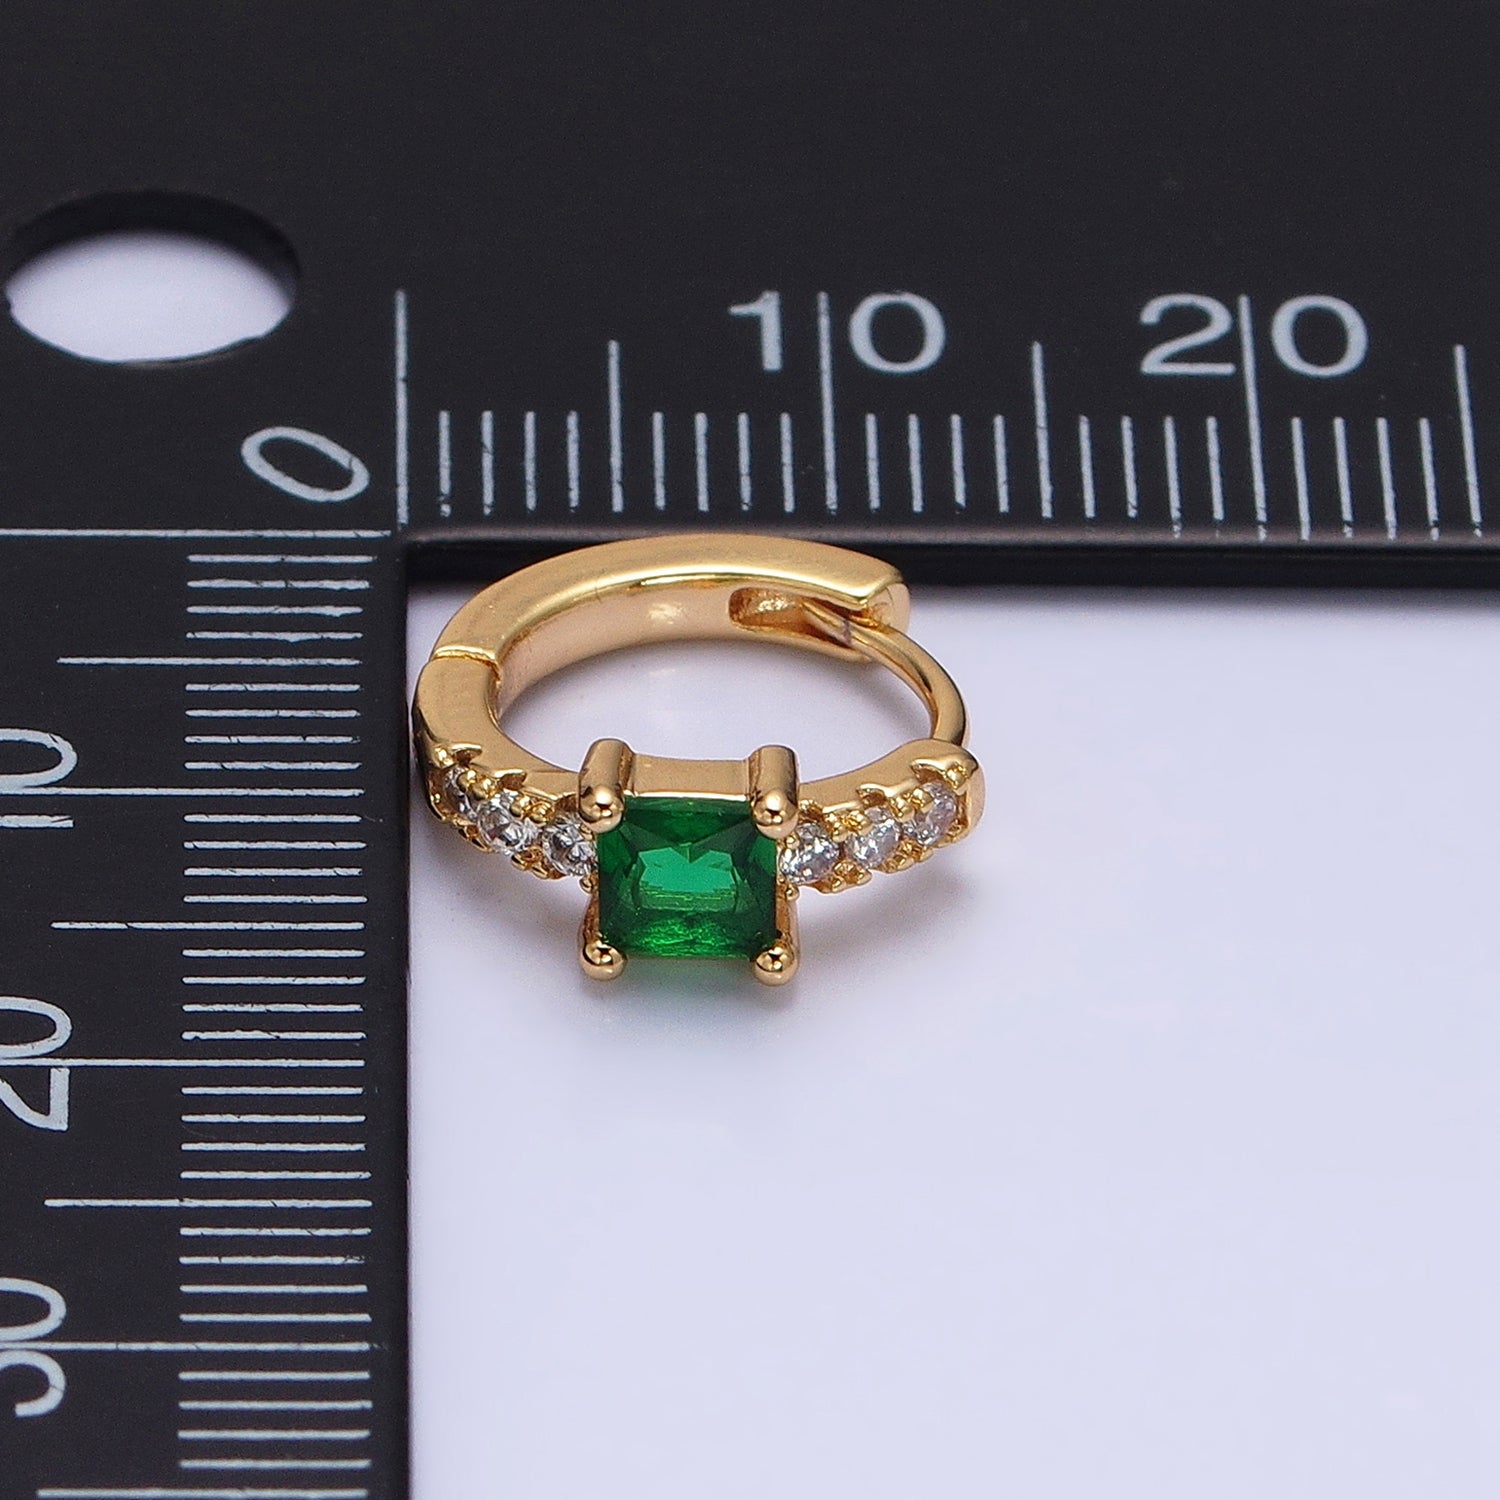 Mini Gold Filled Huggie Earring with Emerald Green Cz Stone 15mm Hoop AB815 - DLUXCA